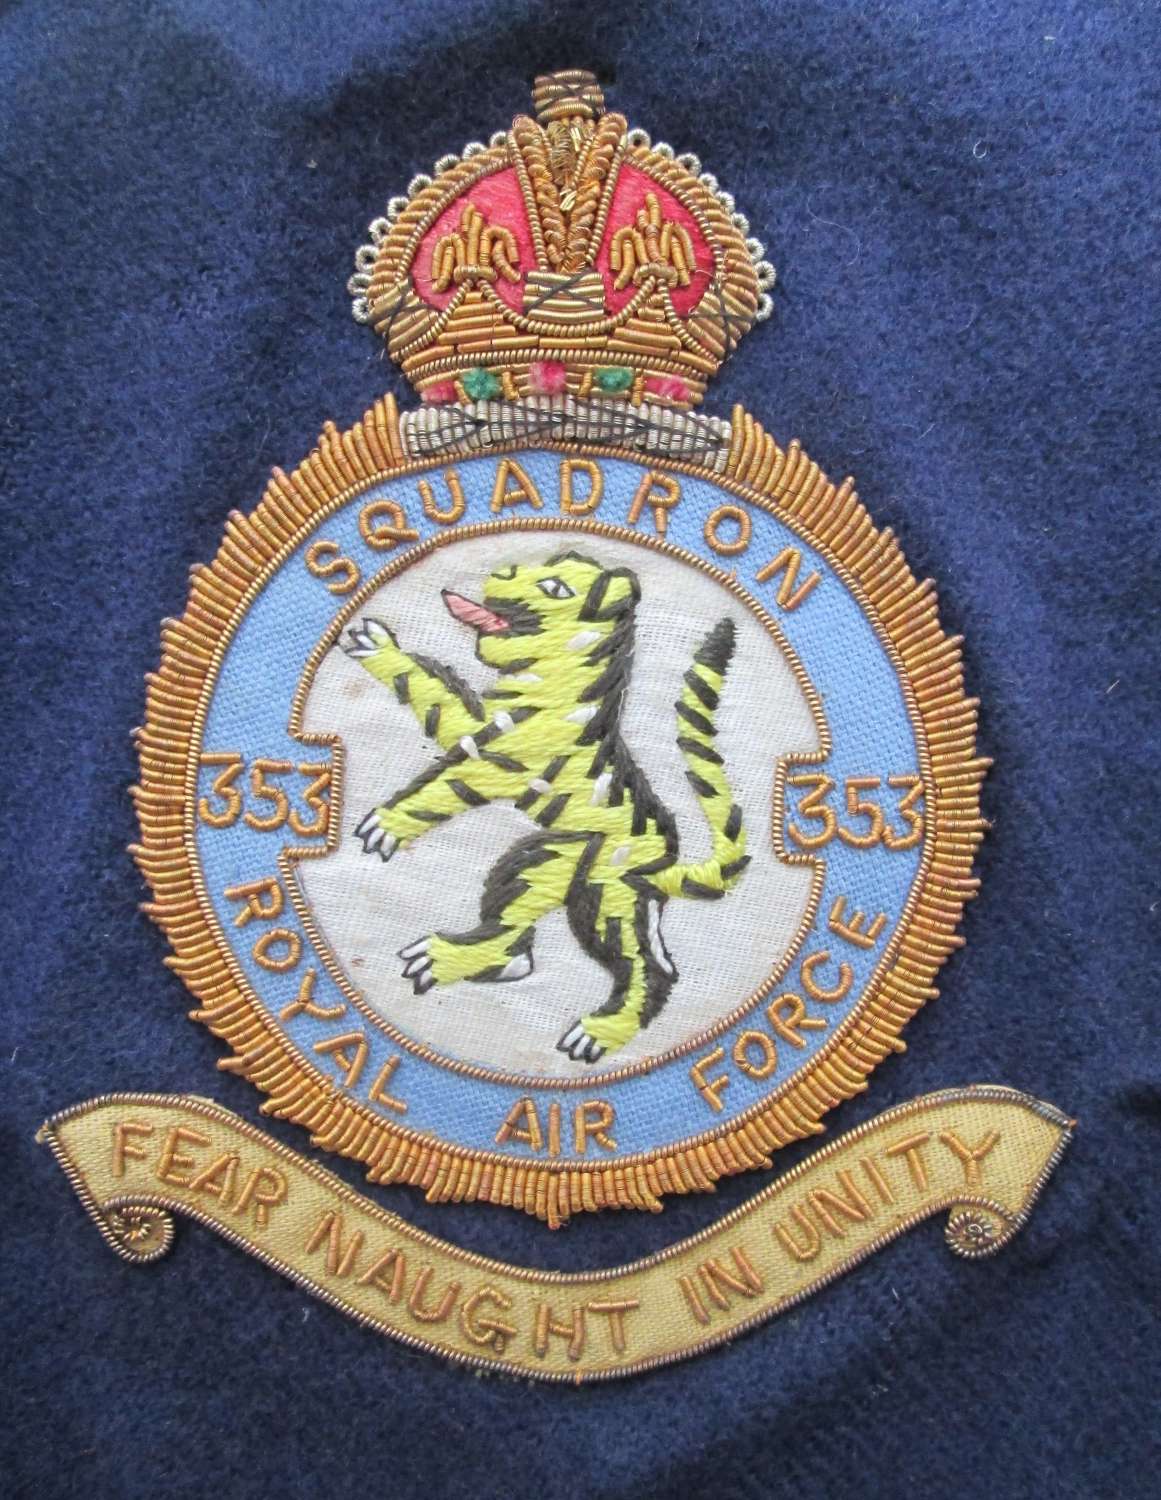 A BULLION WIRE SQUADRON 353 ROYAL AIR FORCE BADGE